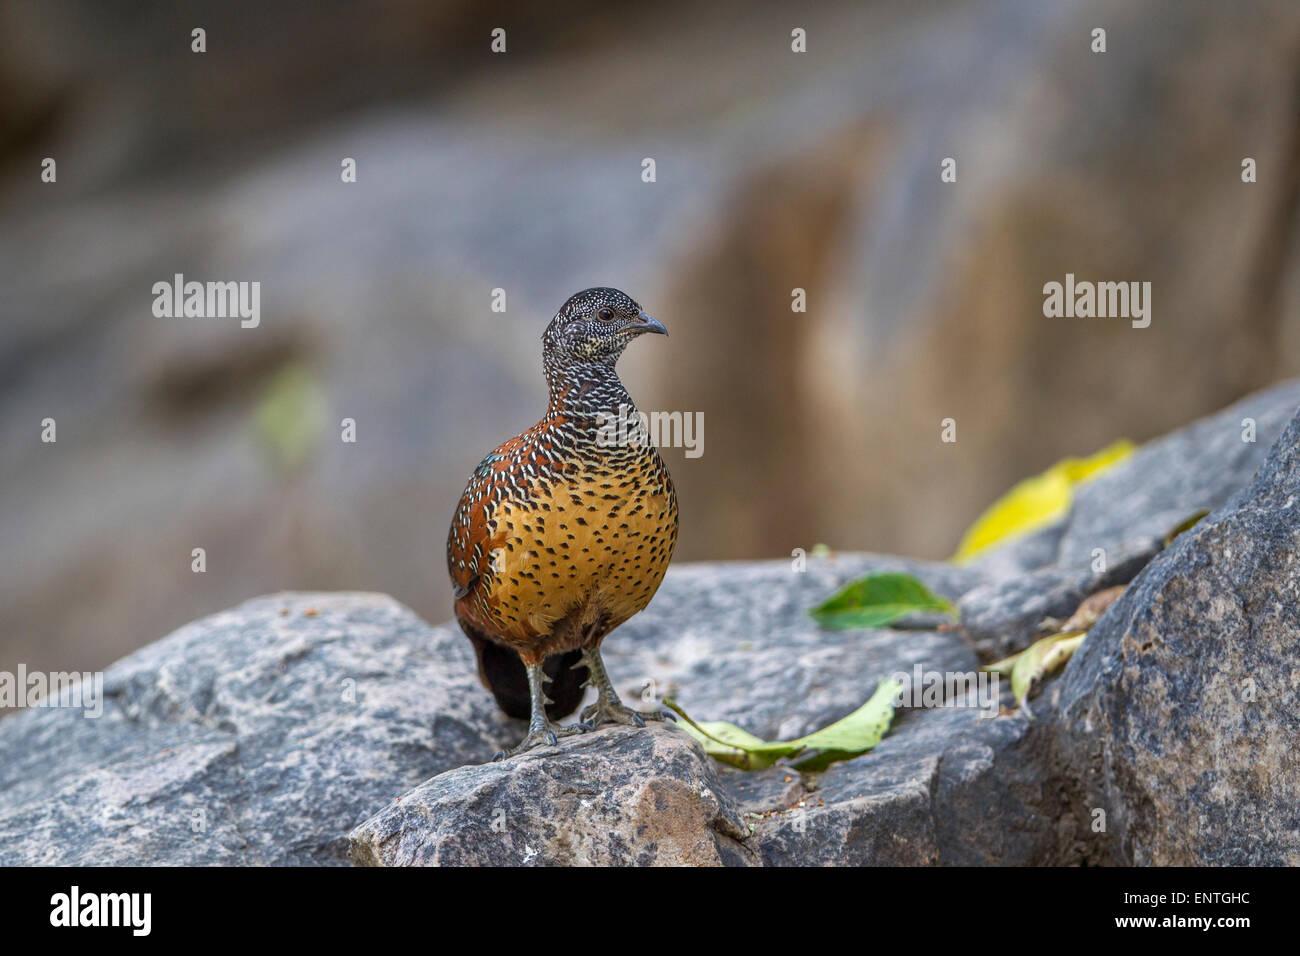 The painted spurfowl [Galloperdix lunulata] on a rocky hill at Ranthambhore Forest, India. Stock Photo